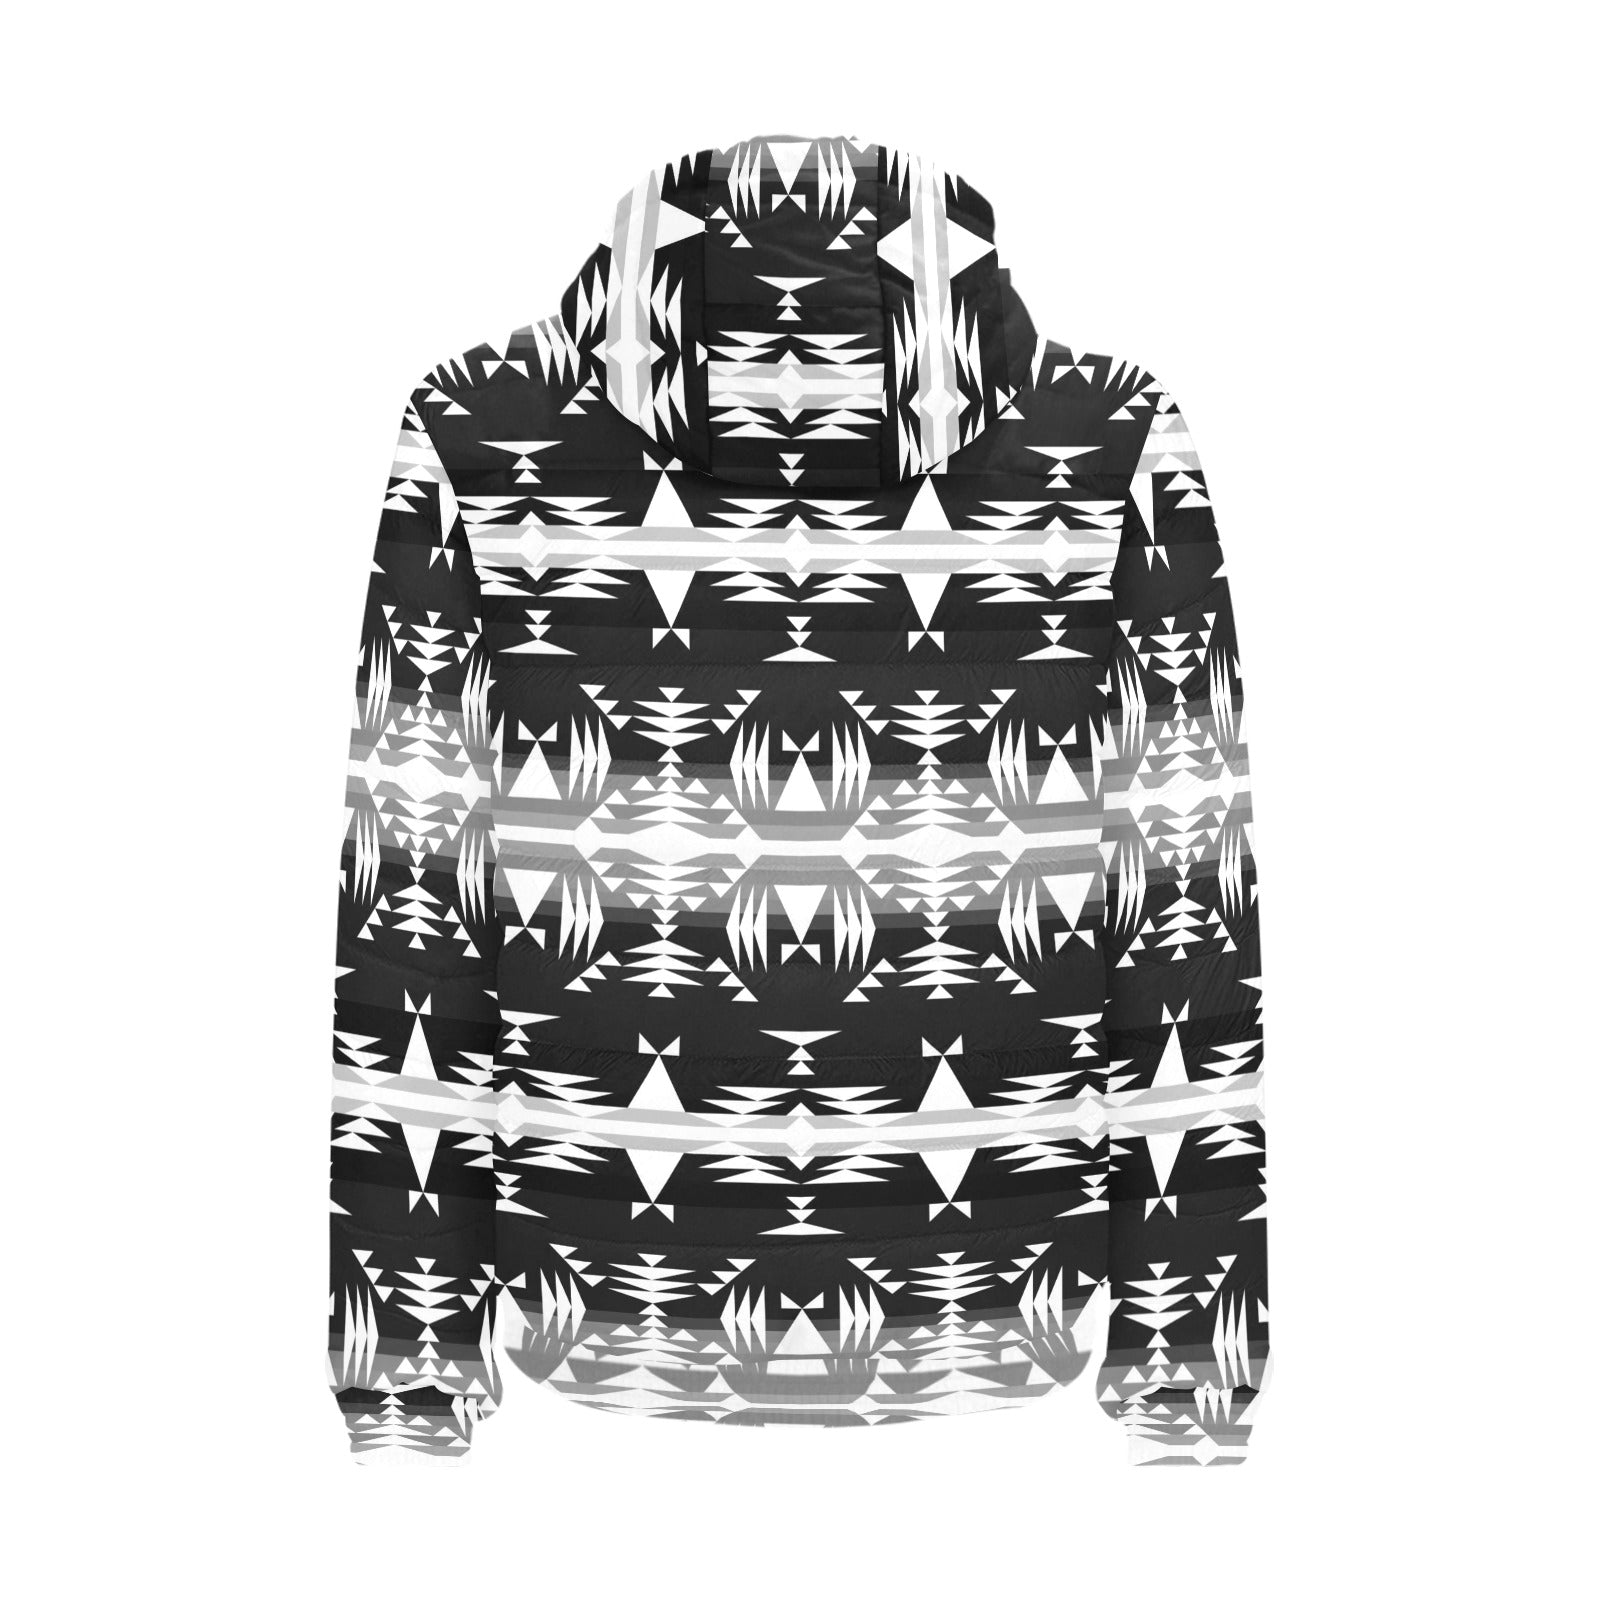 Between the Mountains Black and White Men's Padded Hooded Jacket